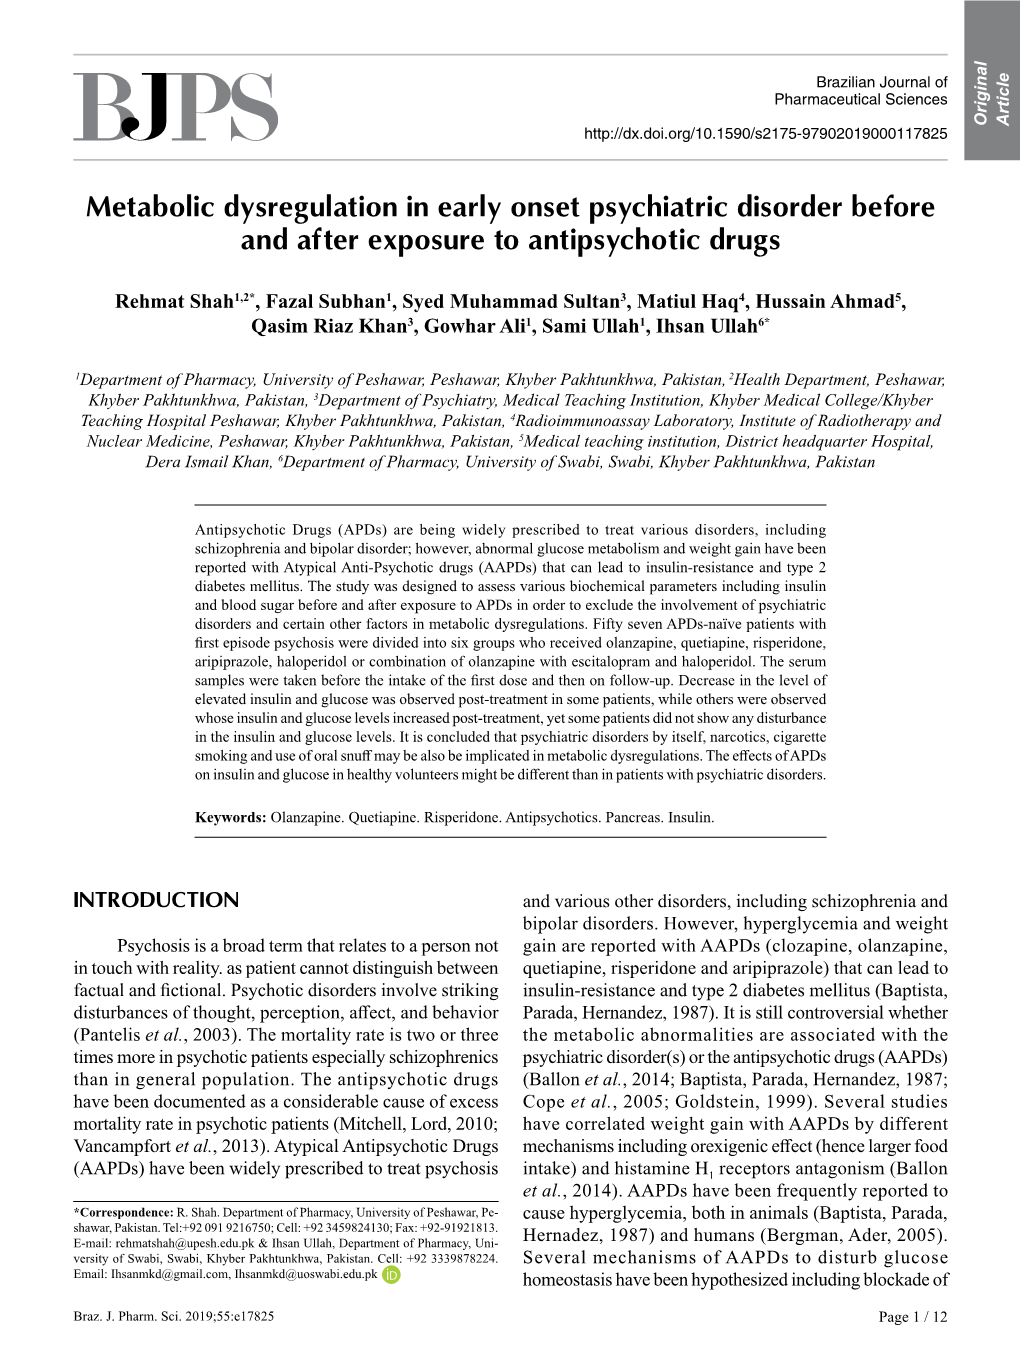 Metabolic Dysregulation in Early Onset Psychiatric Disorder Before and After Exposure to Antipsychotic Drugs